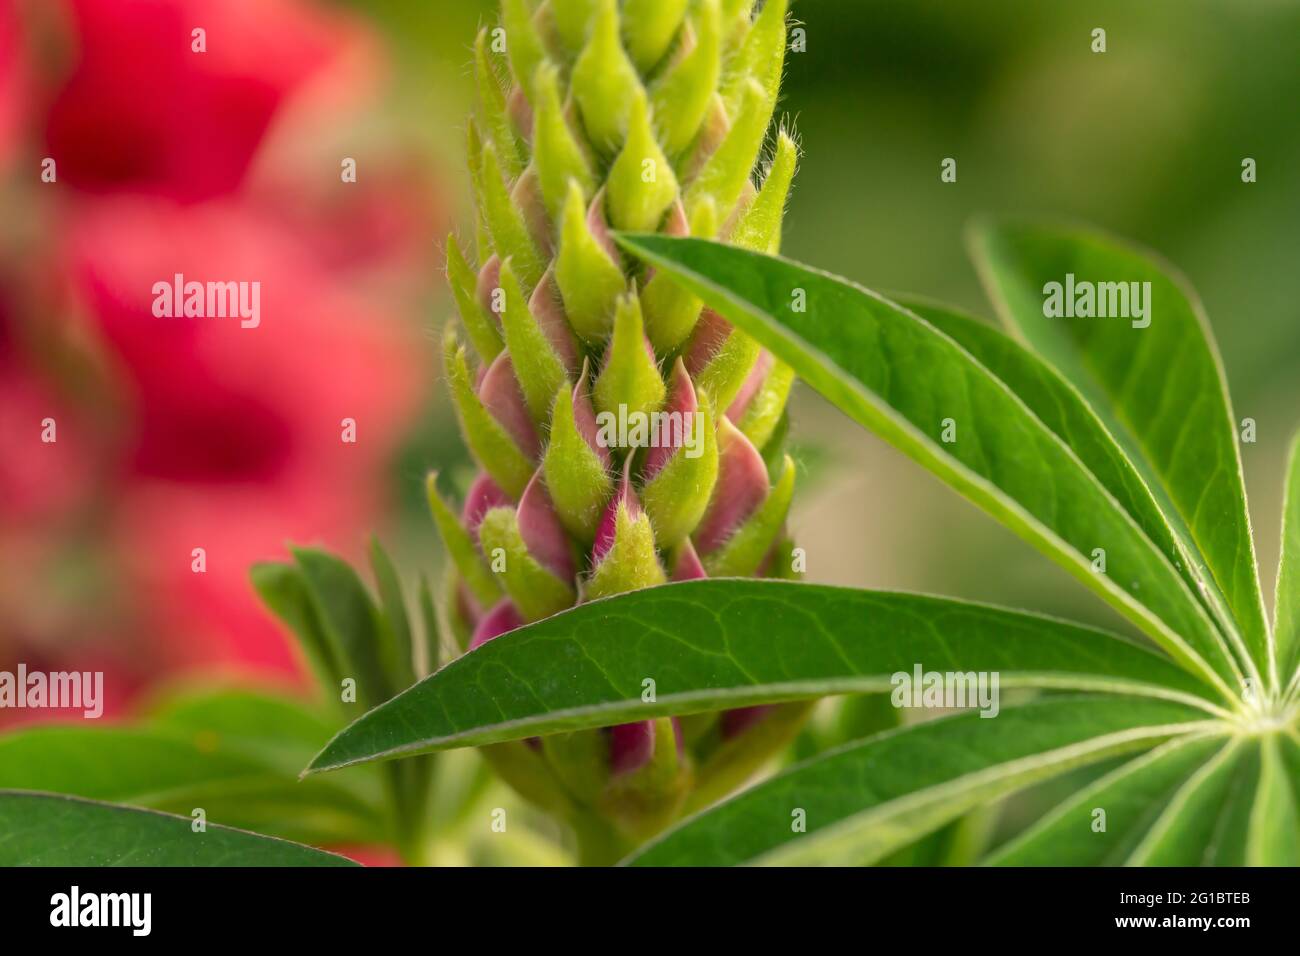 Close-up of pink garden lupin blossoms Stock Photo